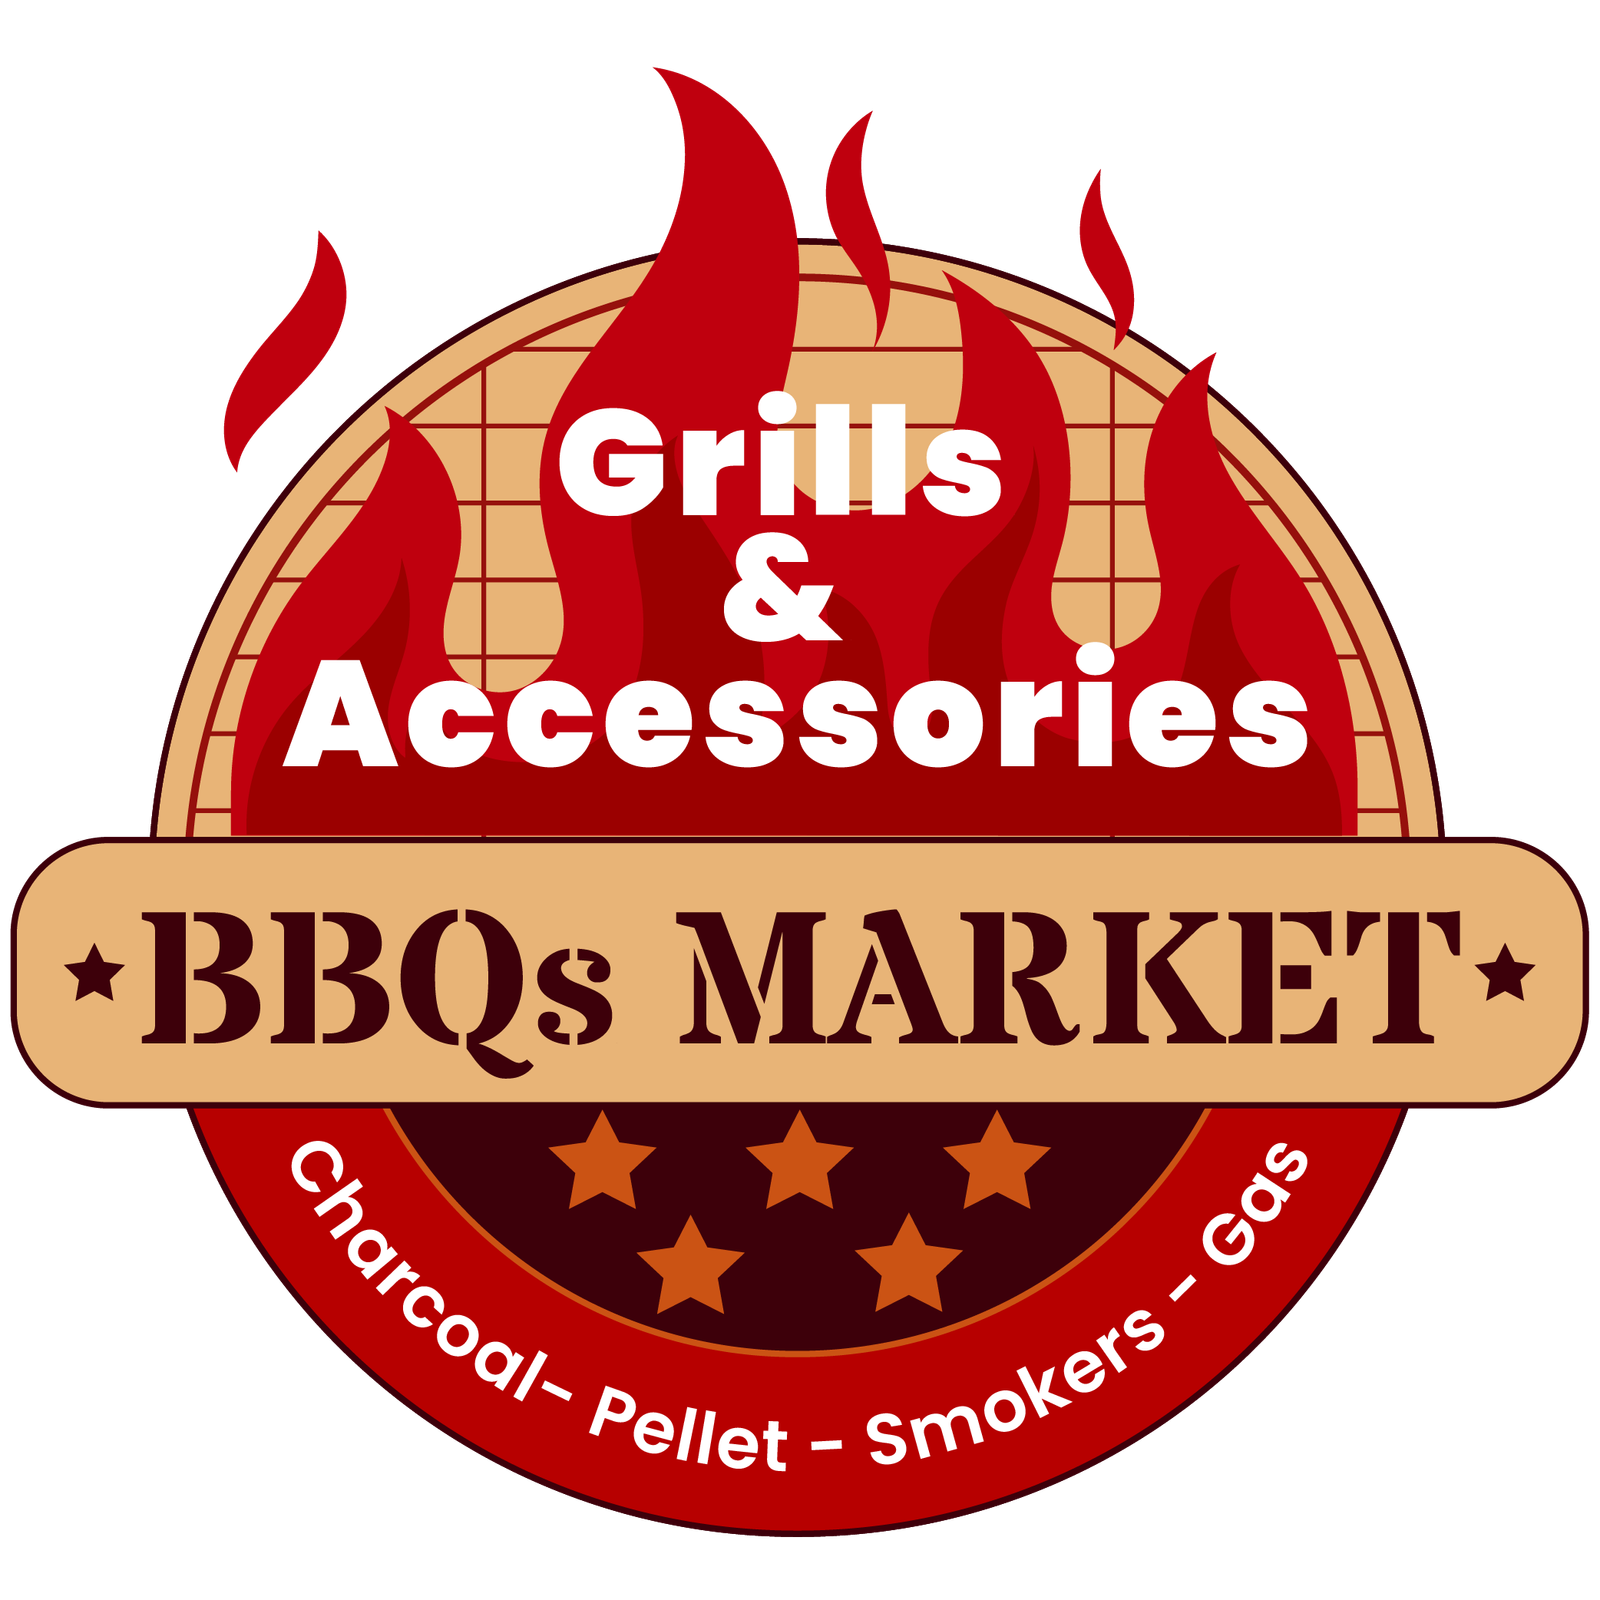 BBQ Grills, Outdoor Kitchens, And BBQ Accessories